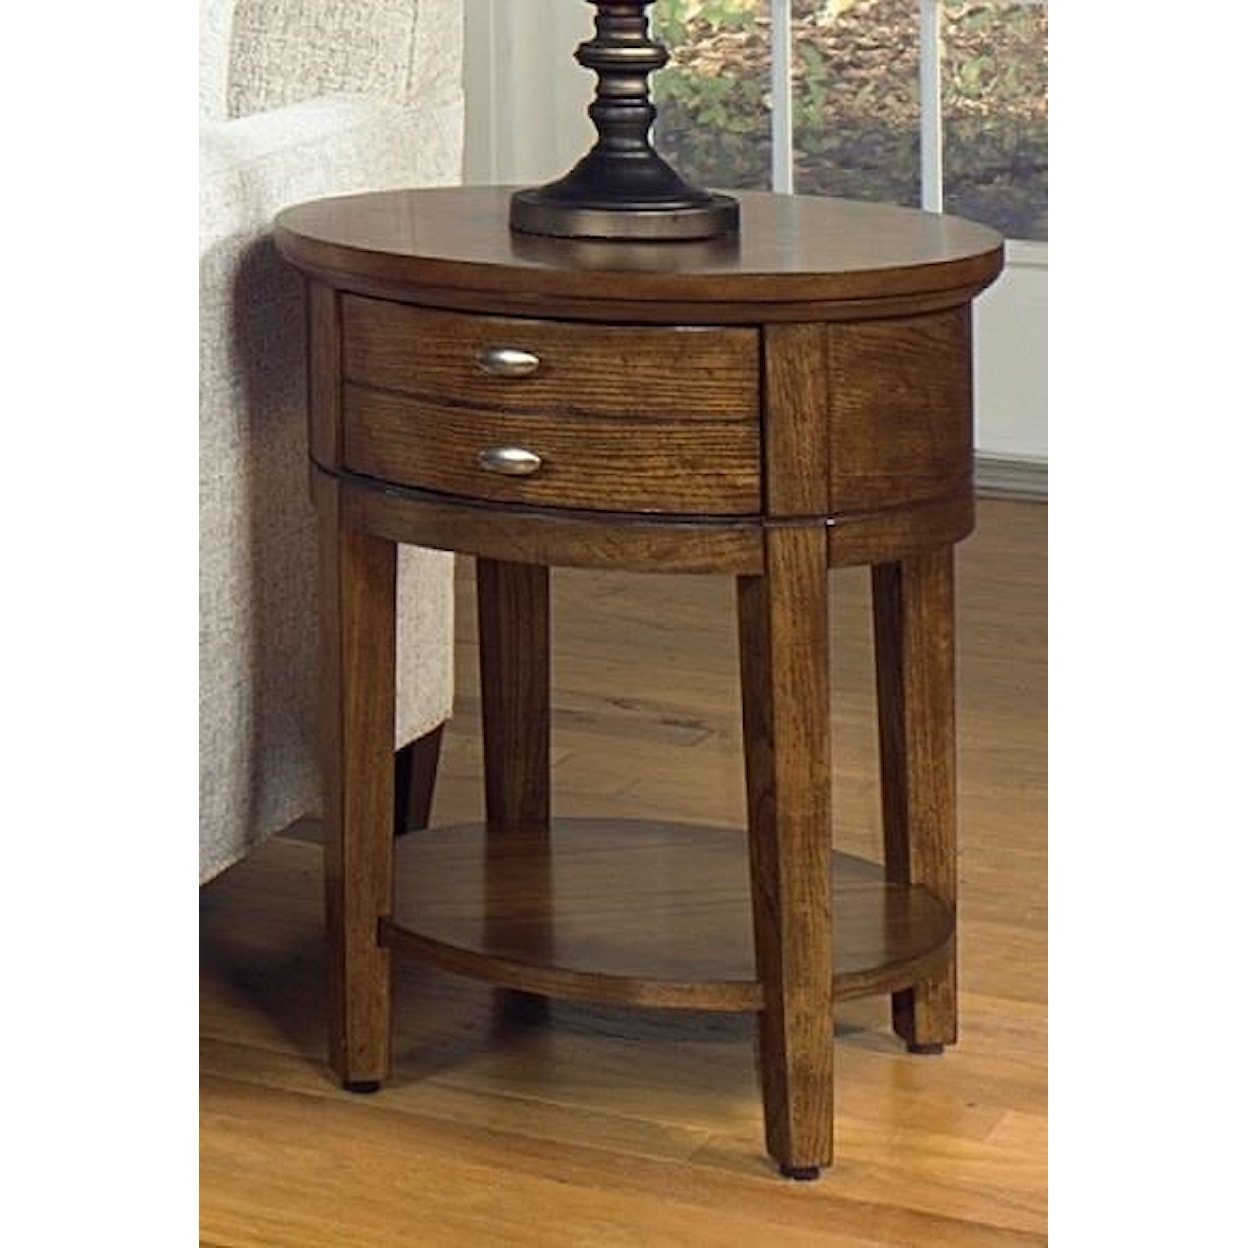 Null Furniture 2016 Round End Table